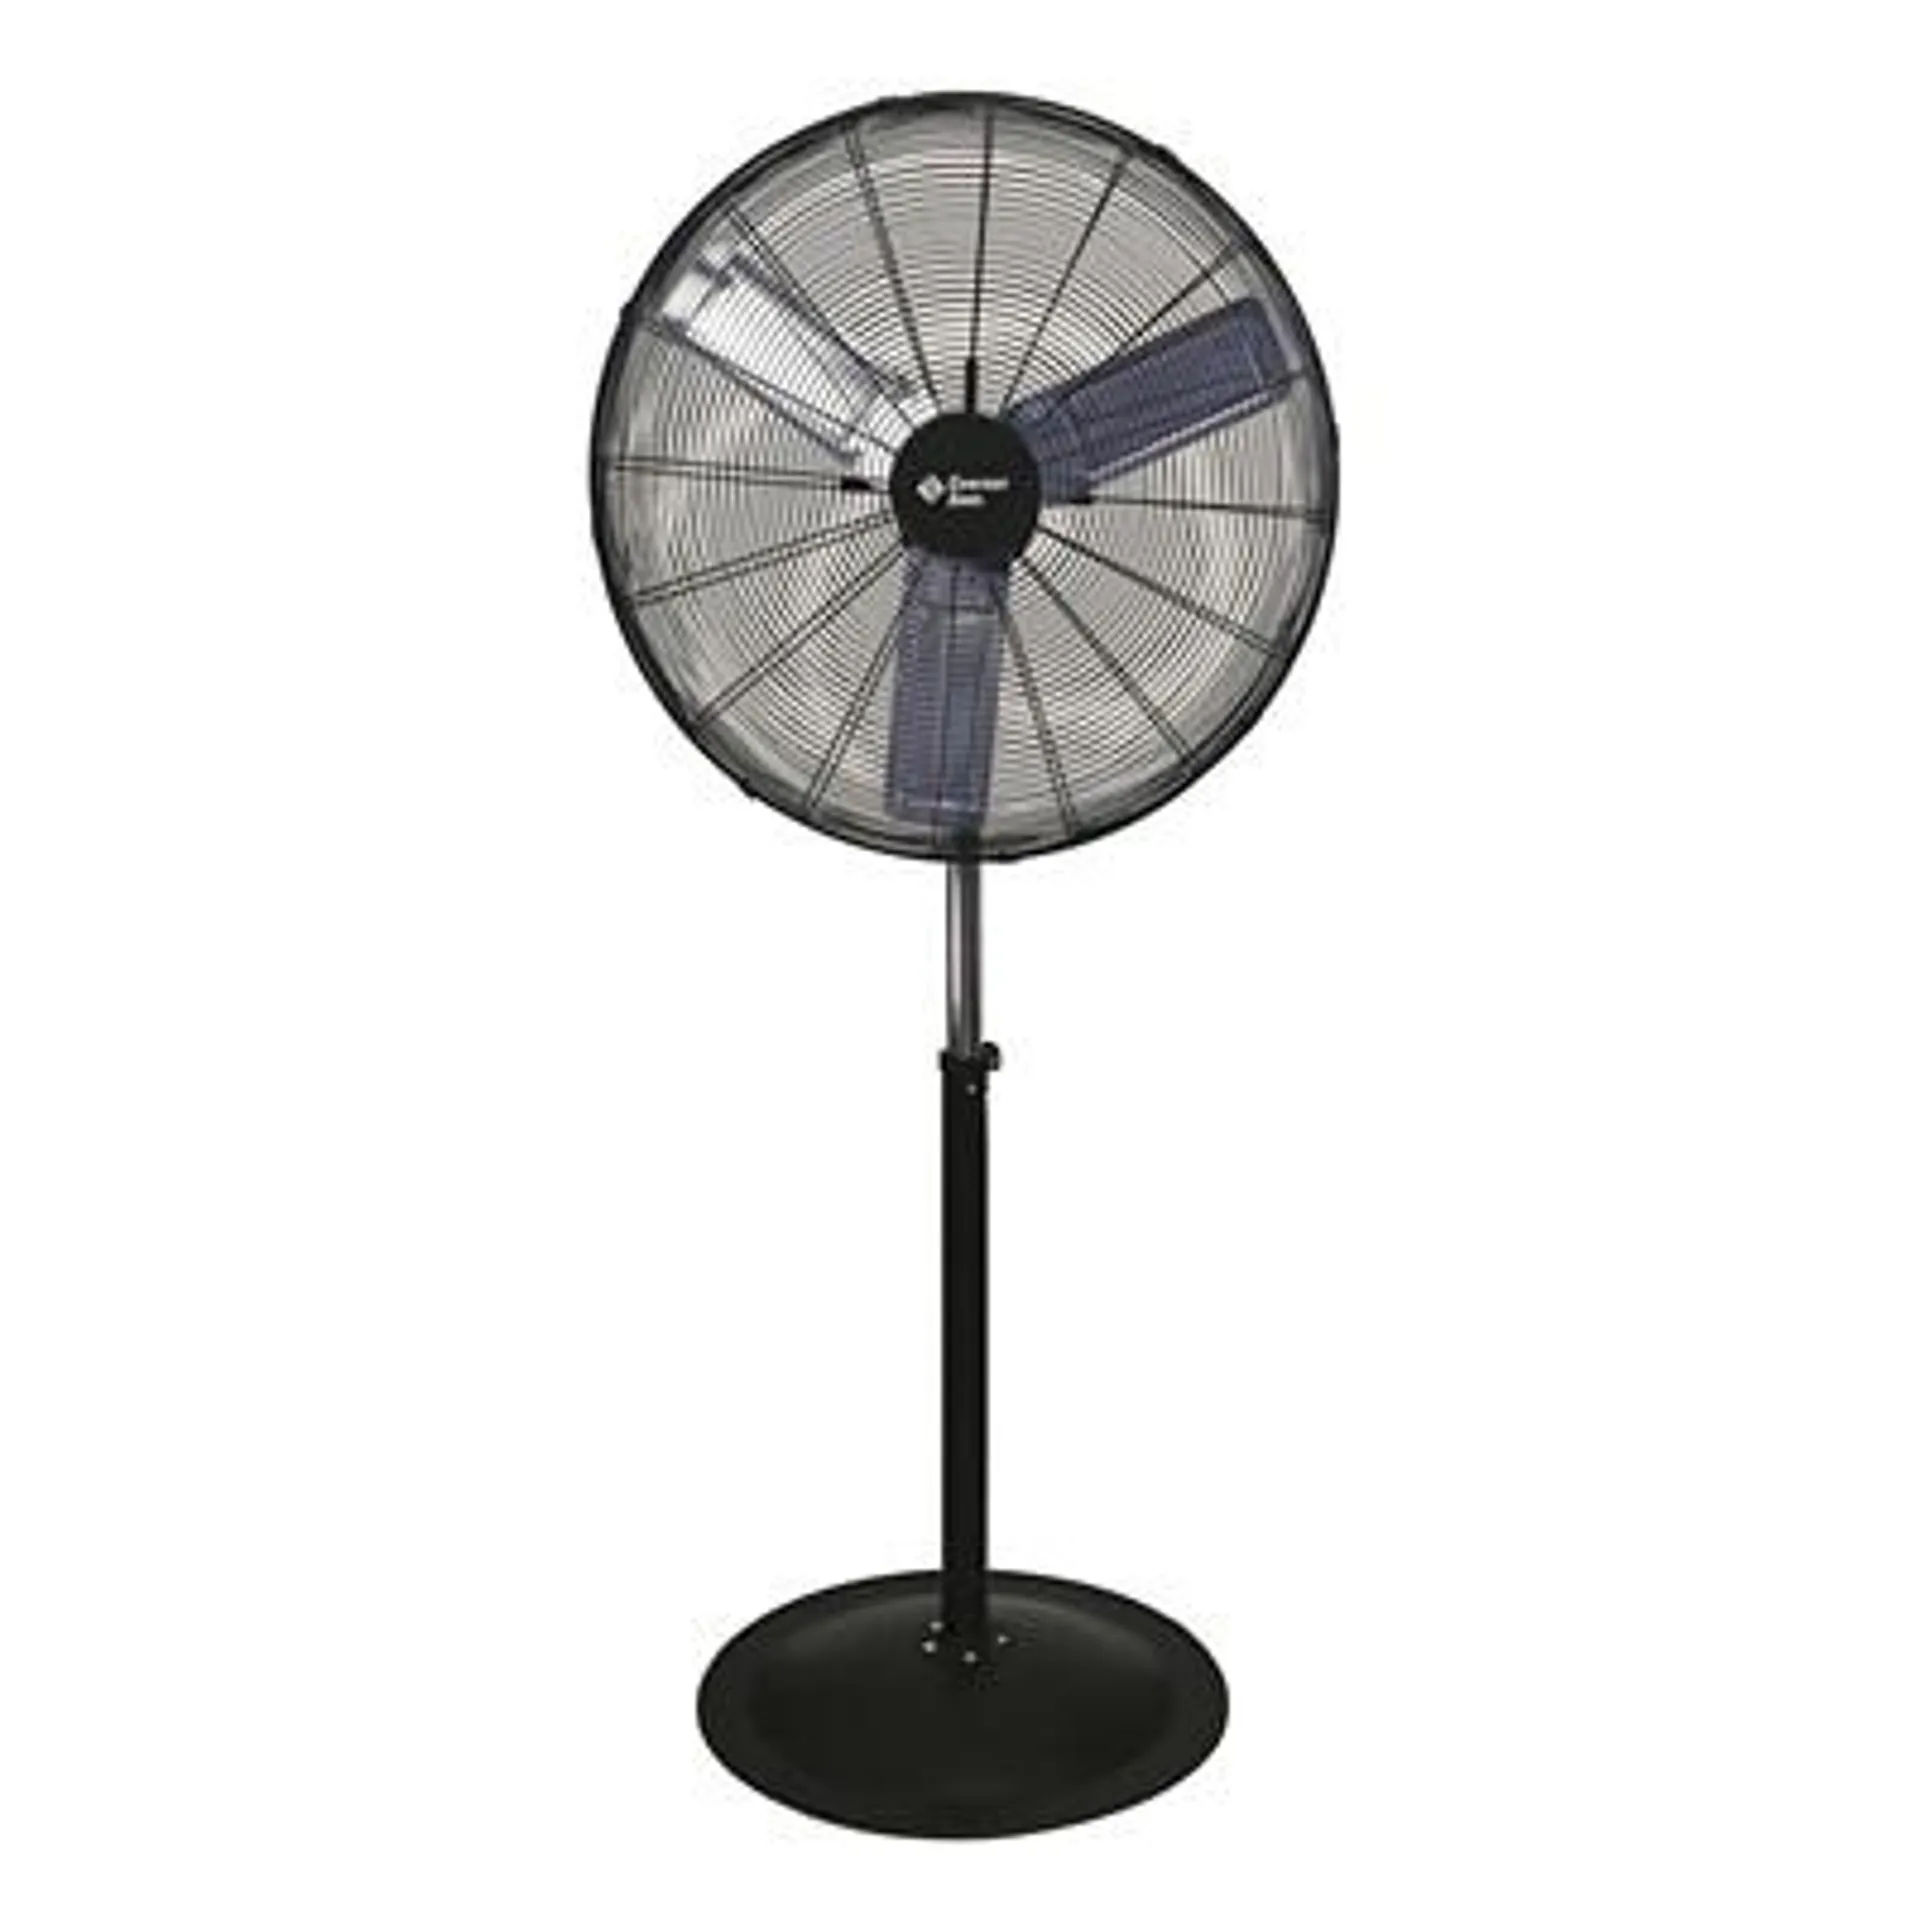 BE or Comfort Zone 30" High-Velocity 2-Speed Industrial Pedestal Fan with Aluminum Blades